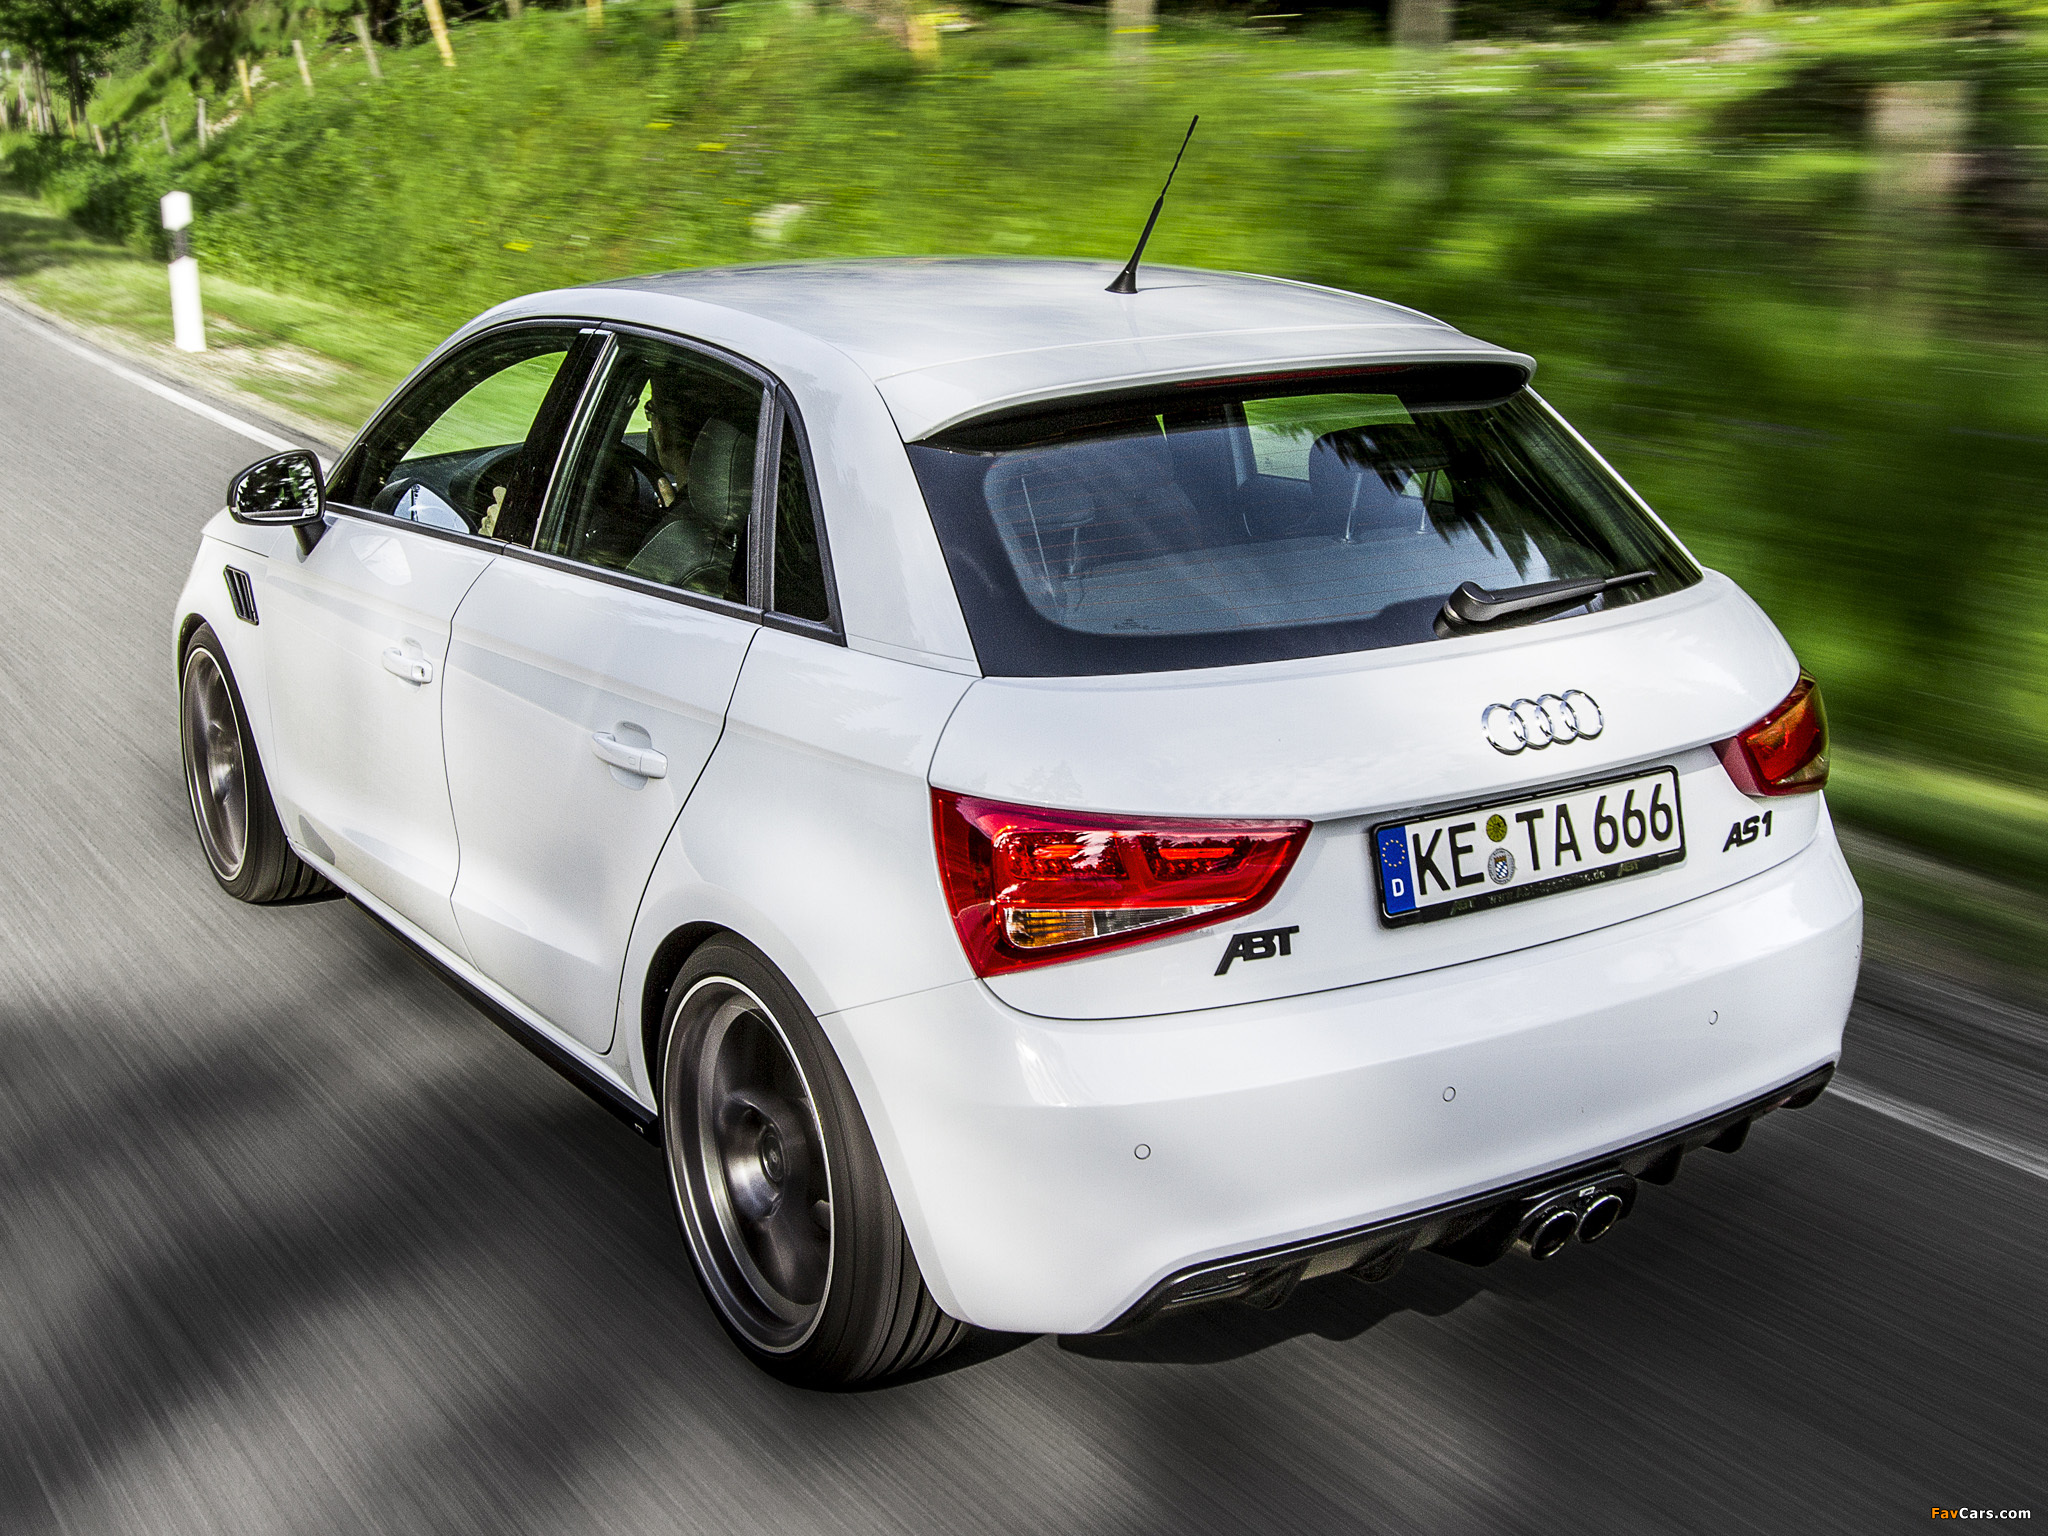 ABT AS1 Sportback 8X (2012) pictures (2048 x 1536)